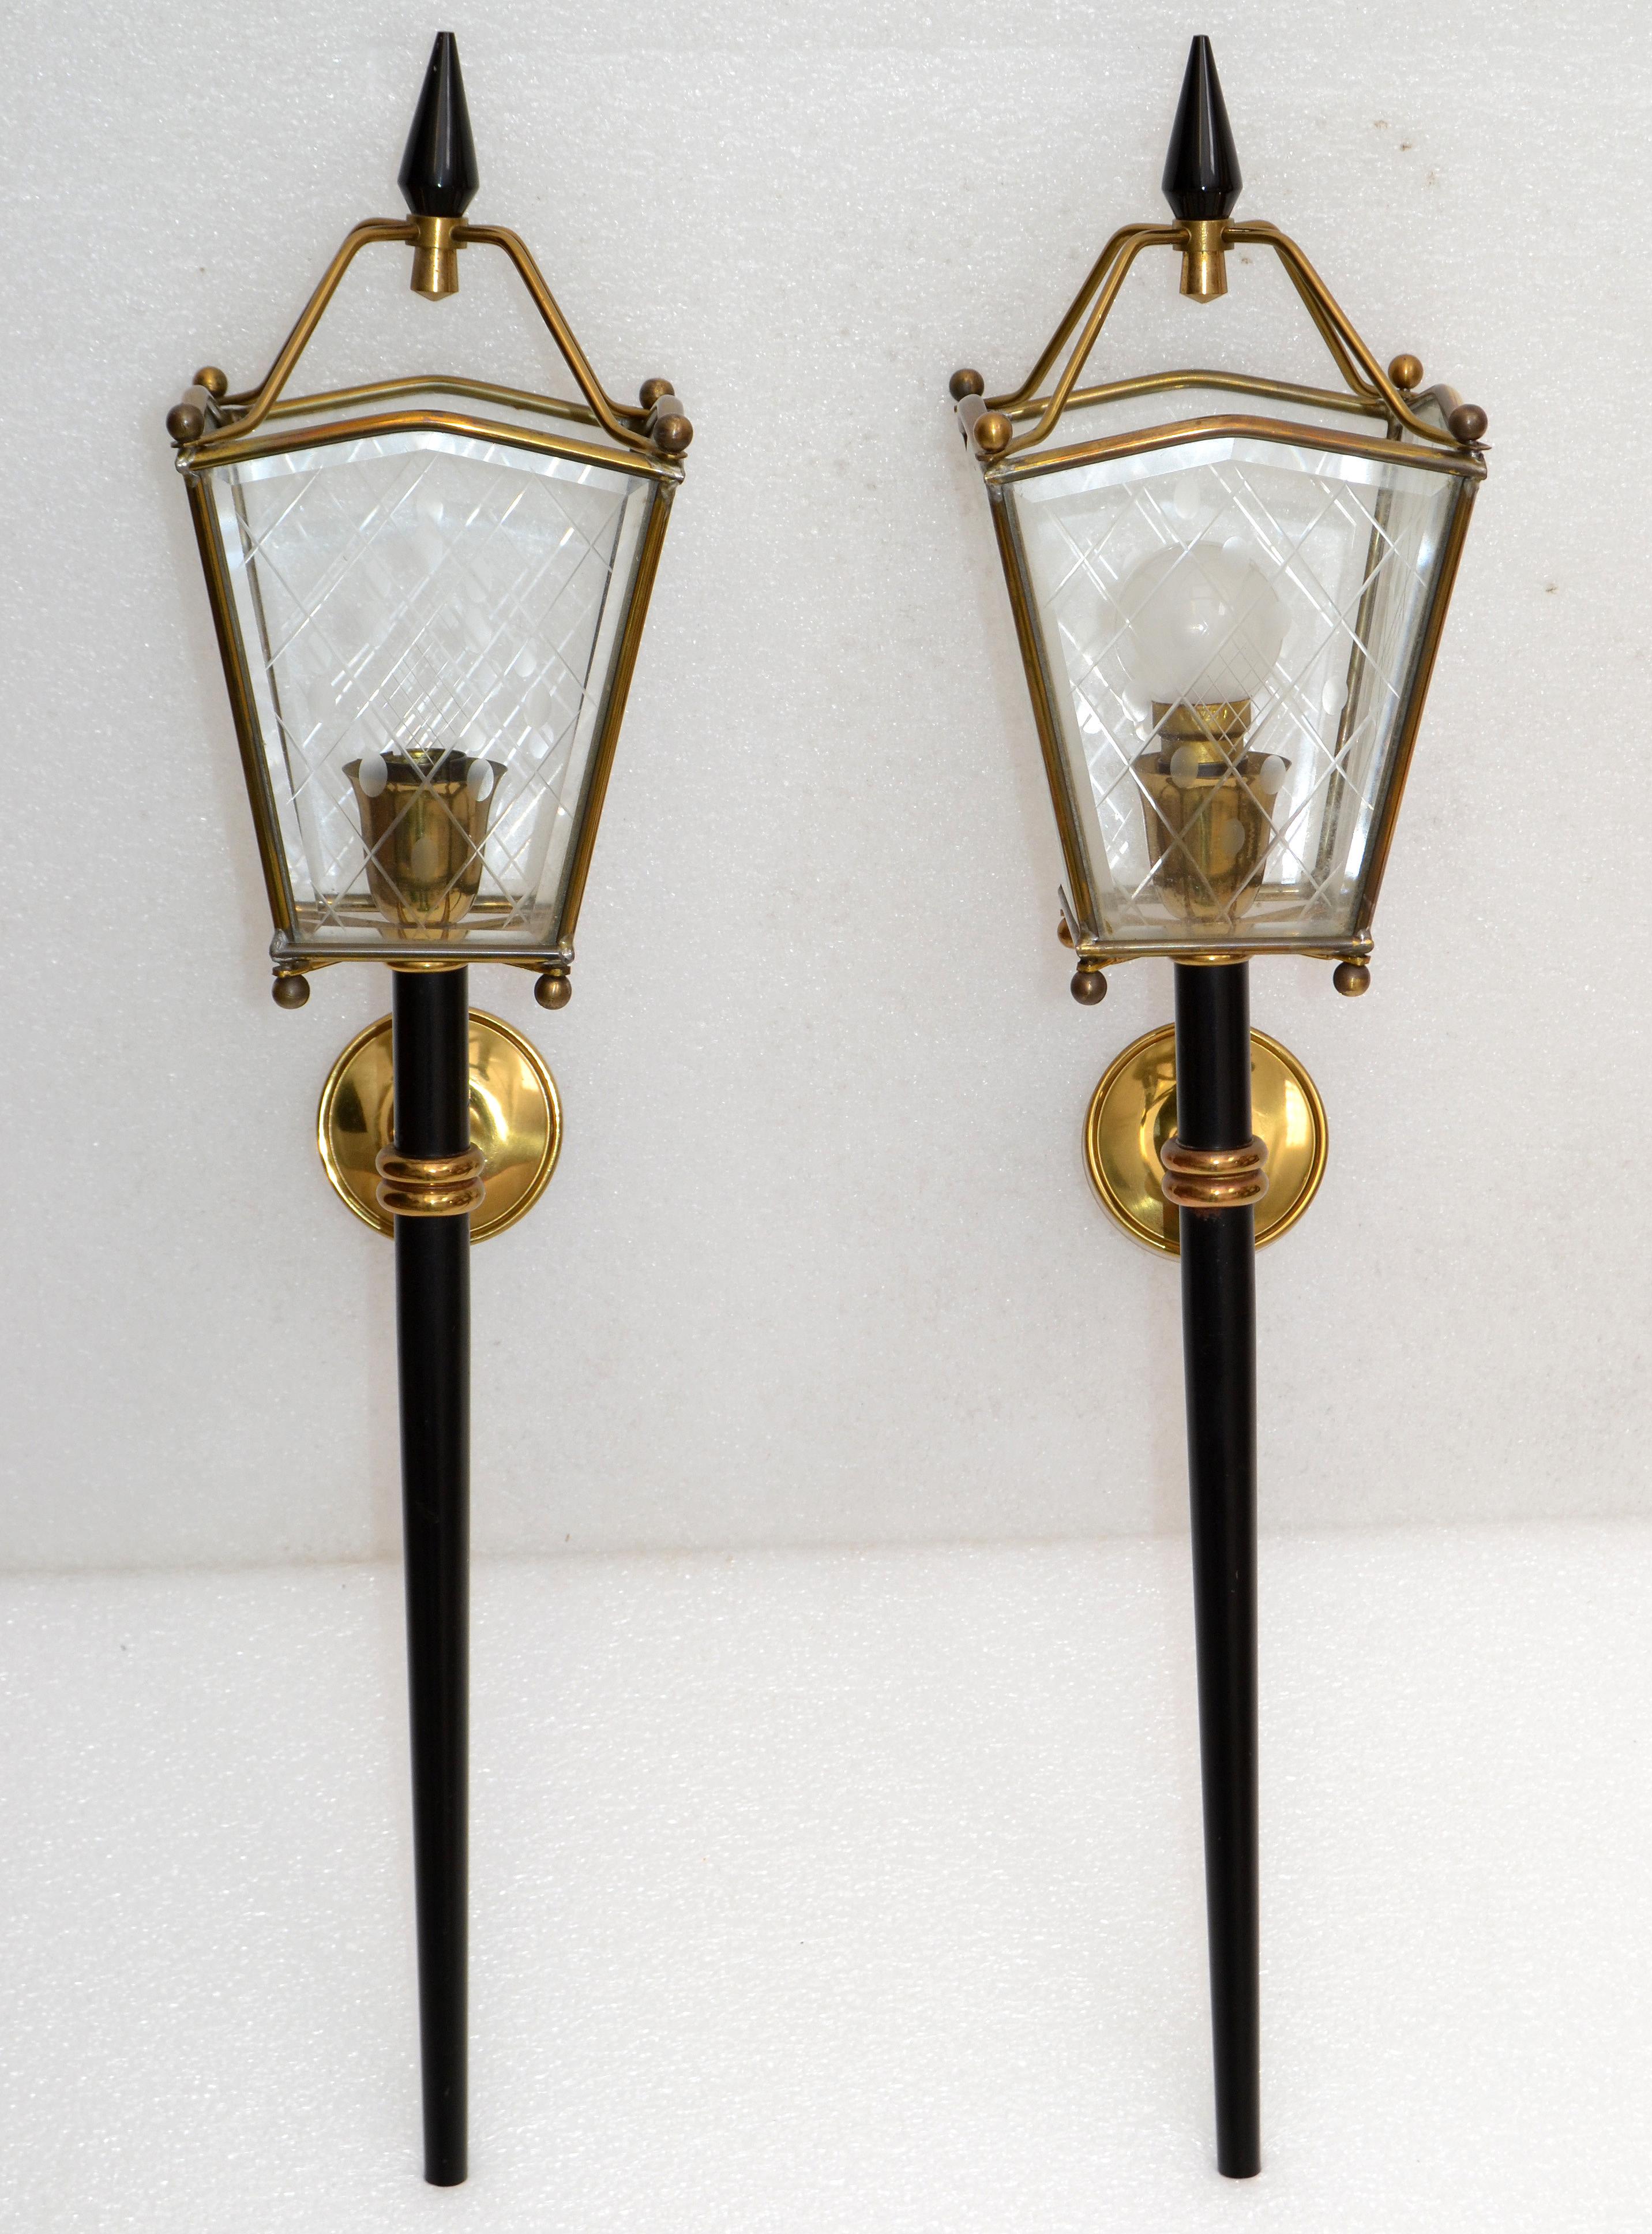 Etched Jacques Adnet Style Sconces Lantern Wall Lamps French Mid-Century Modern, Pair